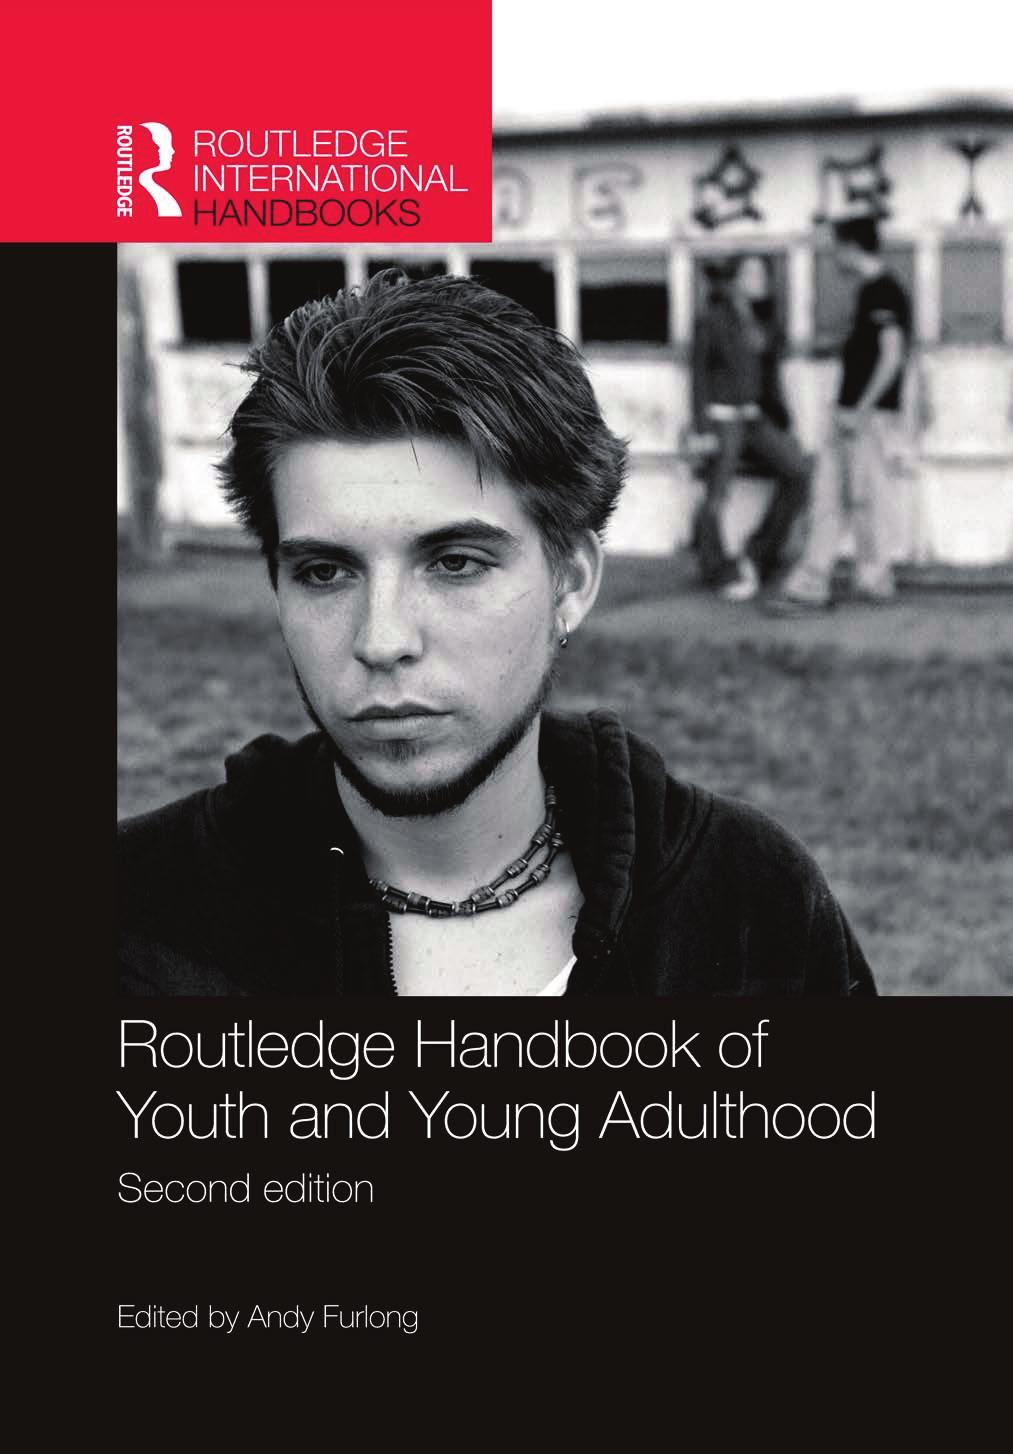 Routledge Handbook of Youth and Young Adulthood by Andy Furlong